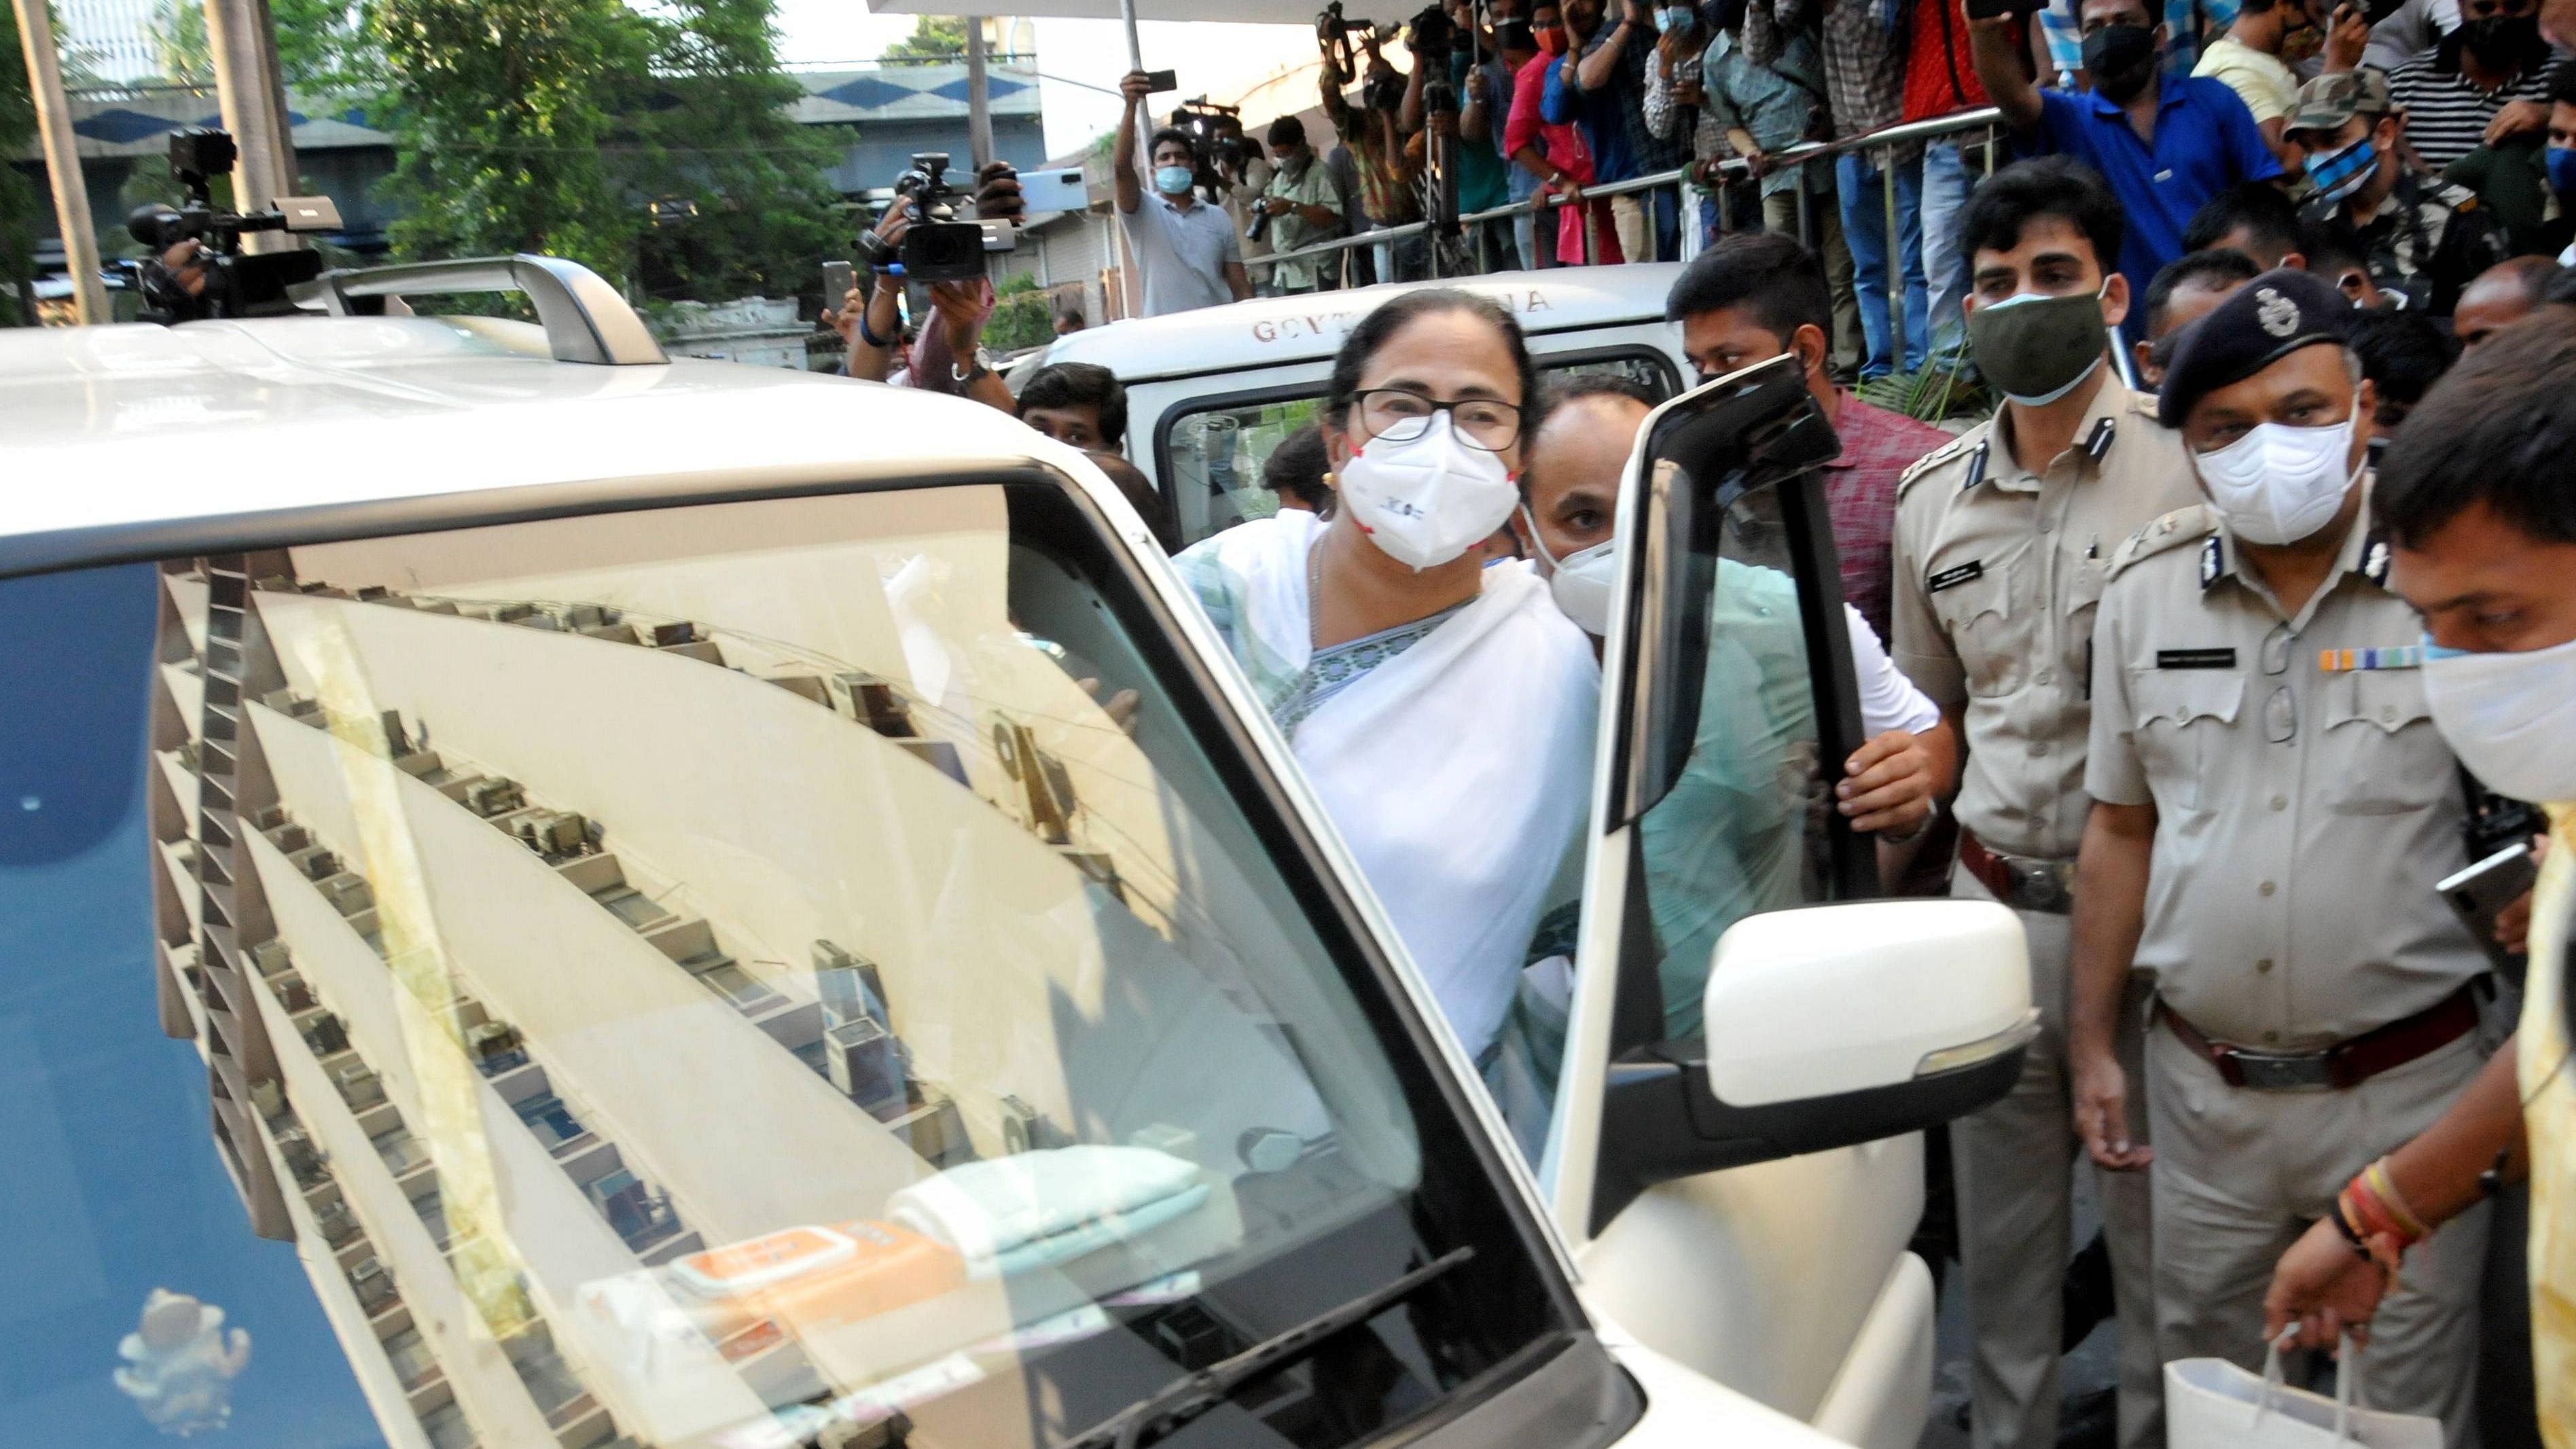 West Bengal CM Mamata Banerjee leaves the CBI office at Nizam Palace where she had come following the arrest of TMC ministers and MLAs in a scam case, in Kolkata, Monday. Credit: PTI File Photo